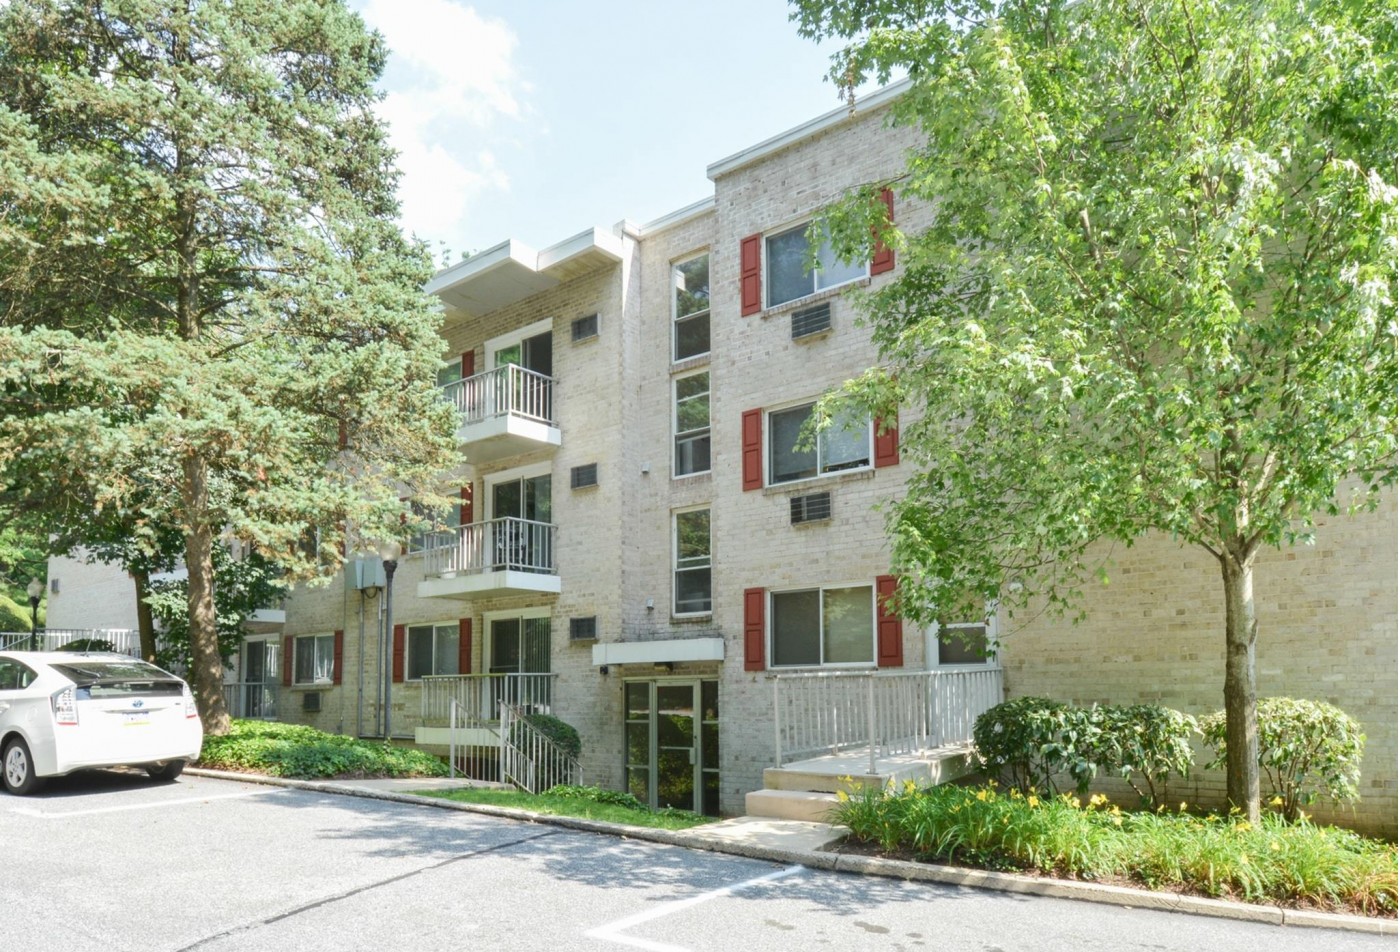 Apartment Homes in Media, PA | Gayley Park Apartments